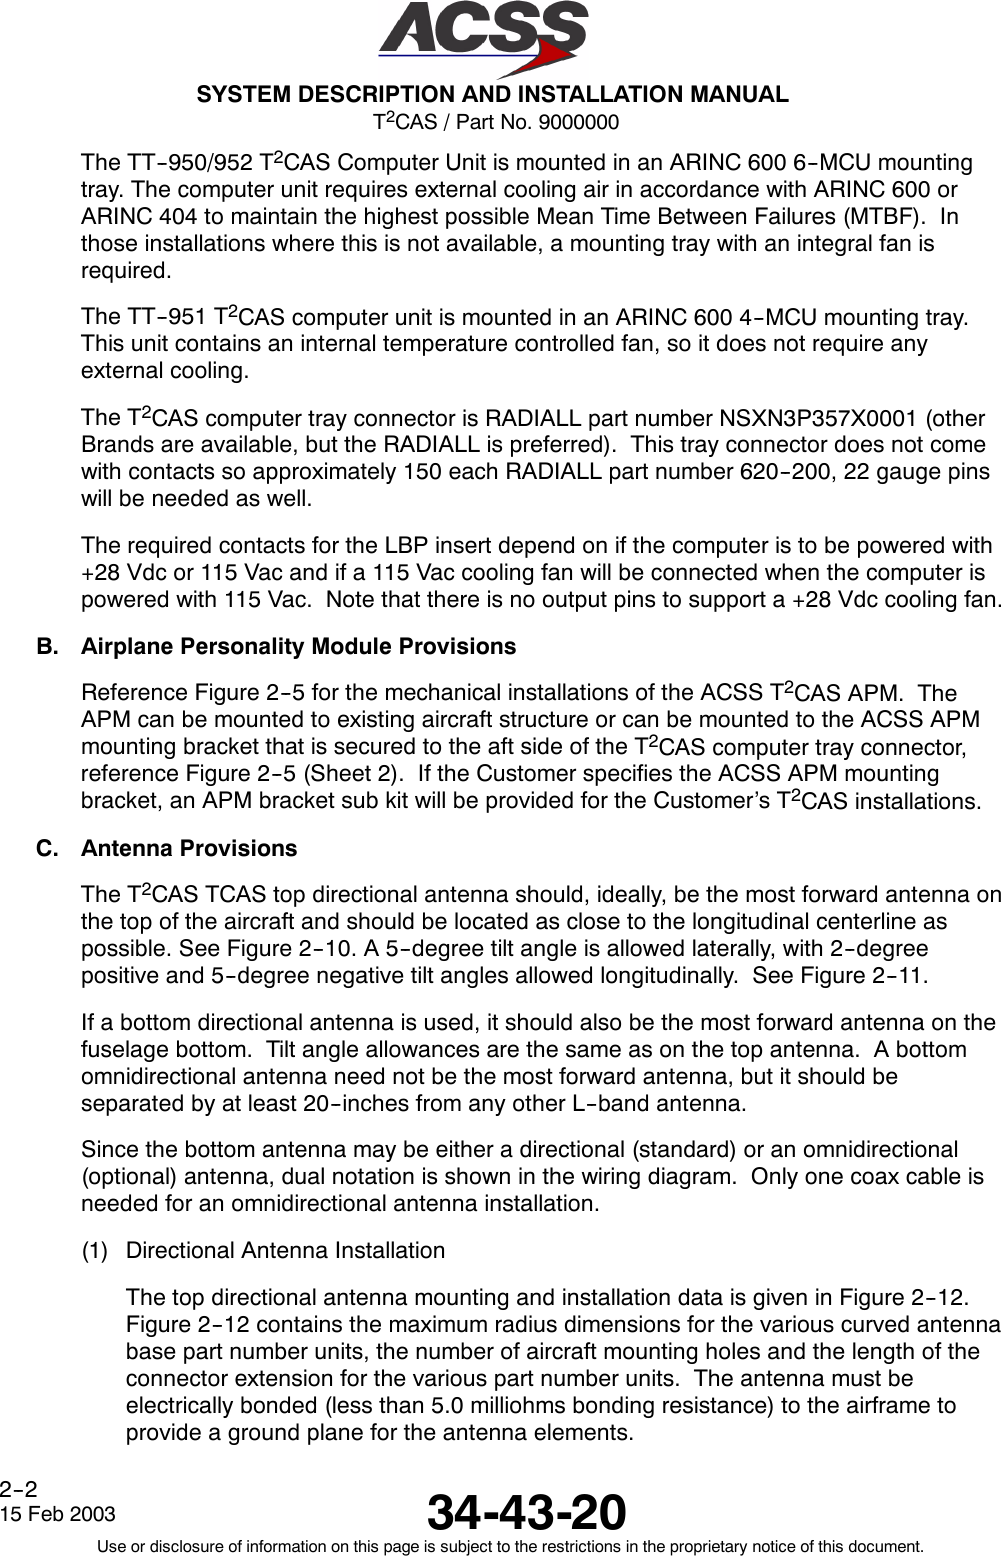 T2CAS / Part No. 9000000SYSTEM DESCRIPTION AND INSTALLATION MANUAL34-43-2015 Feb 2003Use or disclosure of information on this page is subject to the restrictions in the proprietary notice of this document.2--2The TT--950/952 T2CAS Computer Unit is mounted in an ARINC 600 6--MCU mountingtray. The computer unit requires external cooling air in accordance with ARINC 600 orARINC 404 to maintain the highest possible Mean Time Between Failures (MTBF). Inthose installations where this is not available, a mounting tray with an integral fan isrequired.The TT--951 T2CAS computer unit is mounted in an ARINC 600 4--MCU mounting tray.This unit contains an internal temperature controlled fan, so it does not require anyexternal cooling.The T2CAS computer tray connector is RADIALL part number NSXN3P357X0001 (otherBrands are available, but the RADIALL is preferred). This tray connector does not comewith contacts so approximately 150 each RADIALL part number 620--200, 22 gauge pinswill be needed as well.The required contacts for the LBP insert depend on if the computer is to be powered with+28 Vdc or 115 Vac and if a 115 Vac cooling fan will be connected when the computer ispowered with 115 Vac. Note that there is no output pins to support a +28 Vdc cooling fan.B. Airplane Personality Module ProvisionsReference Figure 2--5 for the mechanical installations of the ACSS T2CAS APM. TheAPM can be mounted to existing aircraft structure or can be mounted to the ACSS APMmounting bracket that is secured to the aft side of the T2CAS computer tray connector,reference Figure 2--5 (Sheet 2). If the Customer specifies the ACSS APM mountingbracket, an APM bracket sub kit will be provided for the Customer’s T2CAS installations.C. Antenna ProvisionsThe T2CAS TCAS top directional antenna should, ideally, be the most forward antenna onthe top of the aircraft and should be located as close to the longitudinal centerline aspossible. See Figure 2--10. A 5--degree tilt angle is allowed laterally, with 2--degreepositive and 5--degree negative tilt angles allowed longitudinally. See Figure 2--11.If a bottom directional antenna is used, it should also be the most forward antenna on thefuselage bottom. Tilt angle allowances are the same as on the top antenna. A bottomomnidirectional antenna need not be the most forward antenna, but it should beseparated by at least 20--inches from any other L--band antenna.Since the bottom antenna may be either a directional (standard) or an omnidirectional(optional) antenna, dual notation is shown in the wiring diagram. Only one coax cable isneeded for an omnidirectional antenna installation.(1) Directional Antenna InstallationThe top directional antenna mounting and installation data is given in Figure 2--12.Figure 2--12 contains the maximum radius dimensions for the various curved antennabase part number units, the number of aircraft mounting holes and the length of theconnector extension for the various part number units. The antenna must beelectrically bonded (less than 5.0 milliohms bonding resistance) to the airframe toprovide a ground plane for the antenna elements.